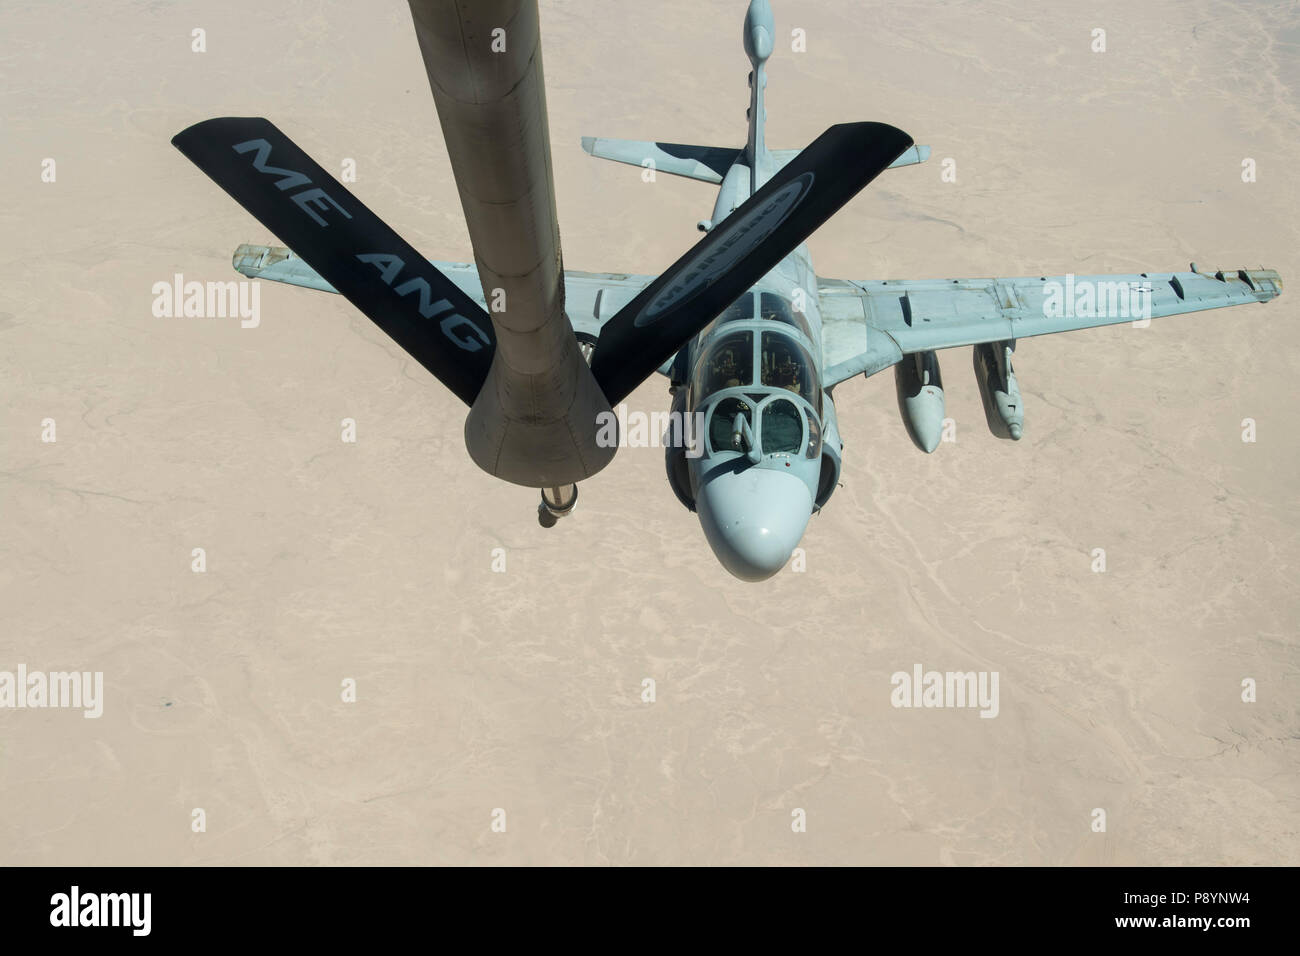 A U.S. Marine Corps EA-6B Prowler, assigned to Marine Tactical Electronic Warfare Squadron 2, receives in-flight fuel from a KC-135 Stratotanker assigned to the 28th Expeditionary Air Refueling Squadron during an aerial refueling mission in support of Operation Inherent Resolve over Iraq, June 28, 2018. The primary mission of the EA-6B Prowler is suppression of enemy air defenses in support of strike aircraft and ground troops by interrupting enemy electronic activity and obtaining tactical electronic intelligence within the combat area. In conjunction with partner forces, Combined Joint Task  Stock Photo